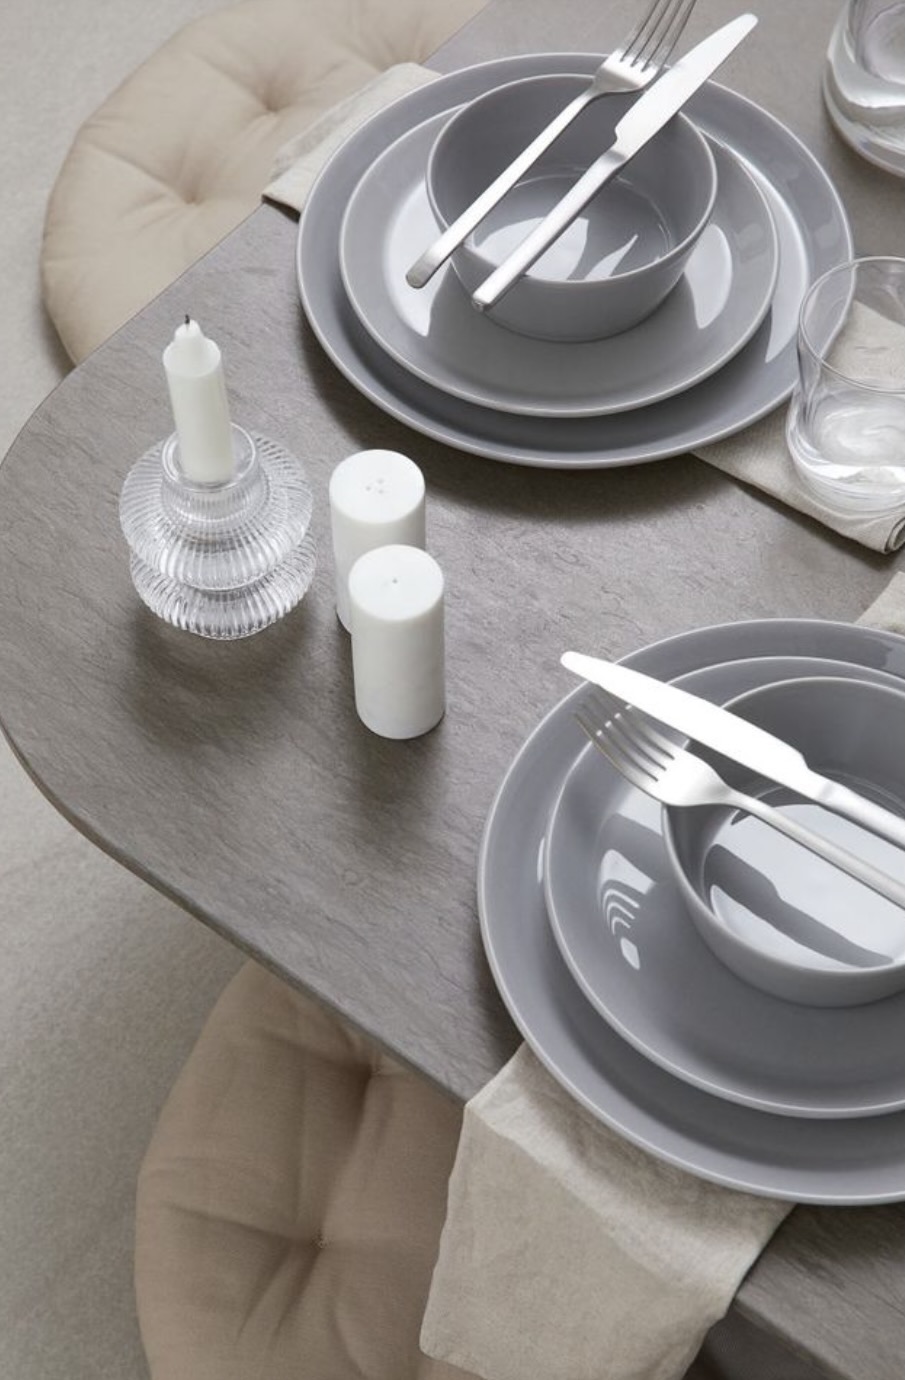 Dishware from H&M